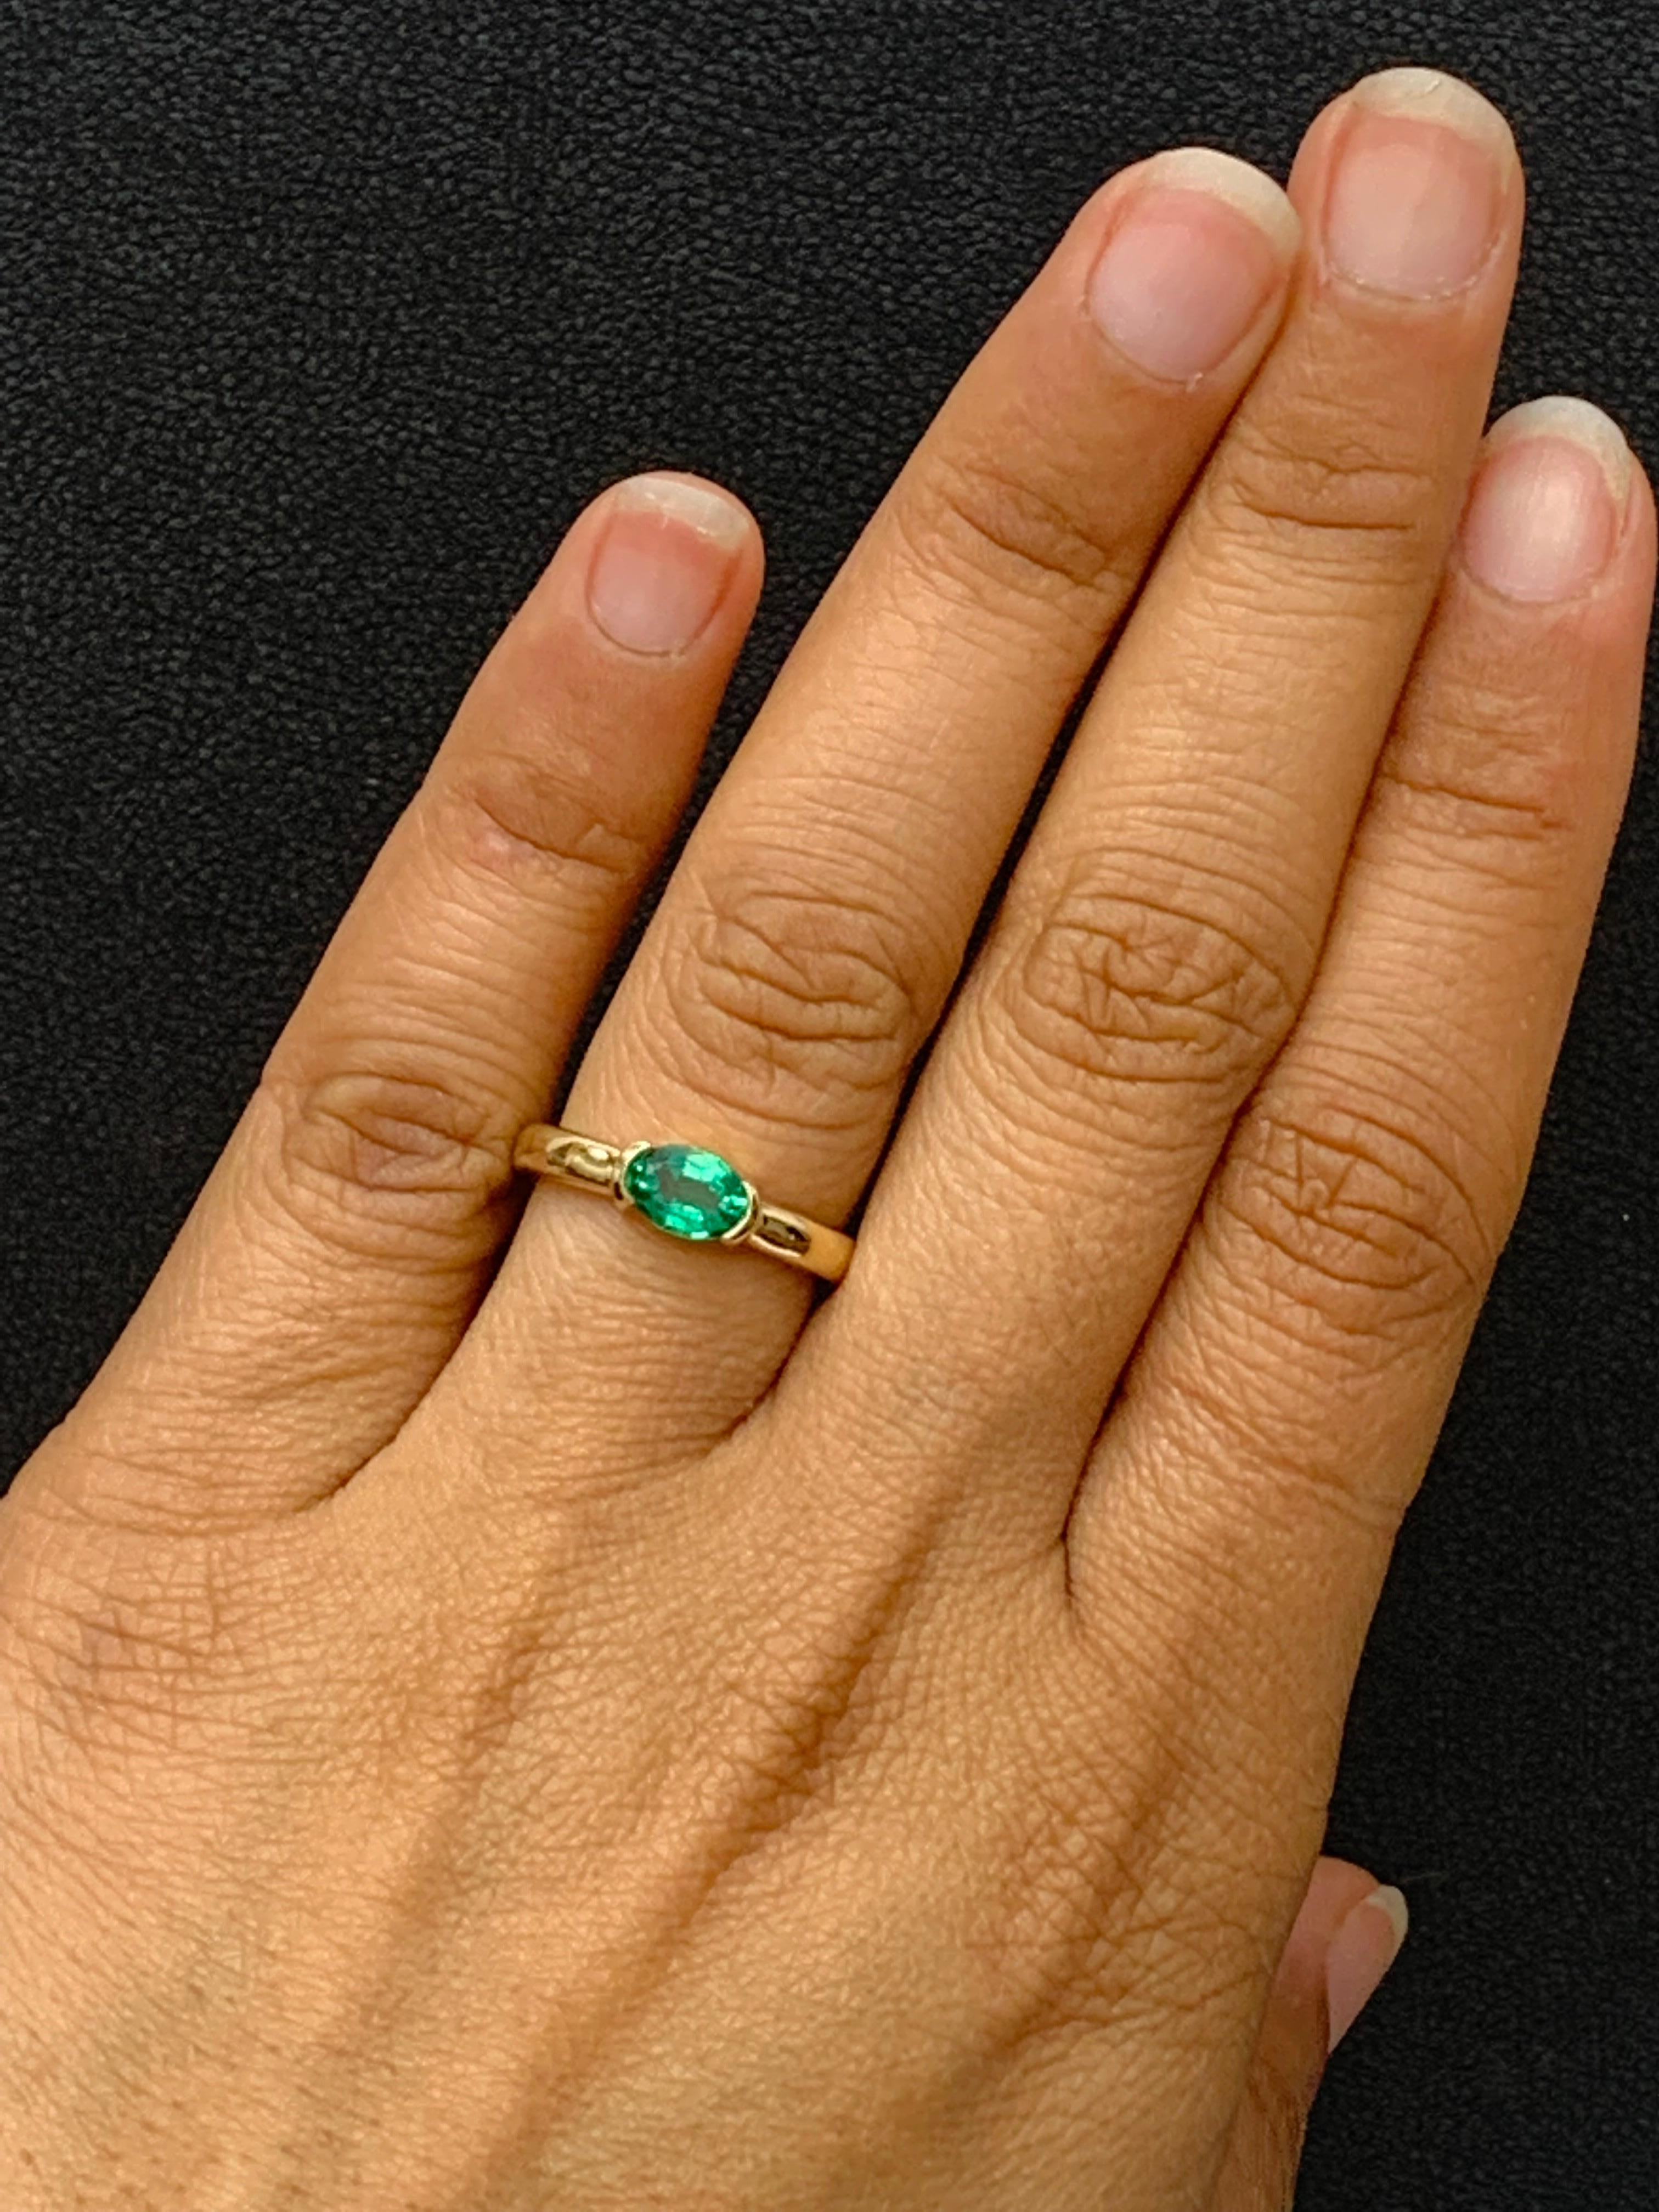 0.77 Carat Oval Cut Emerald Band Ring in 14K Yellow Gold For Sale 3